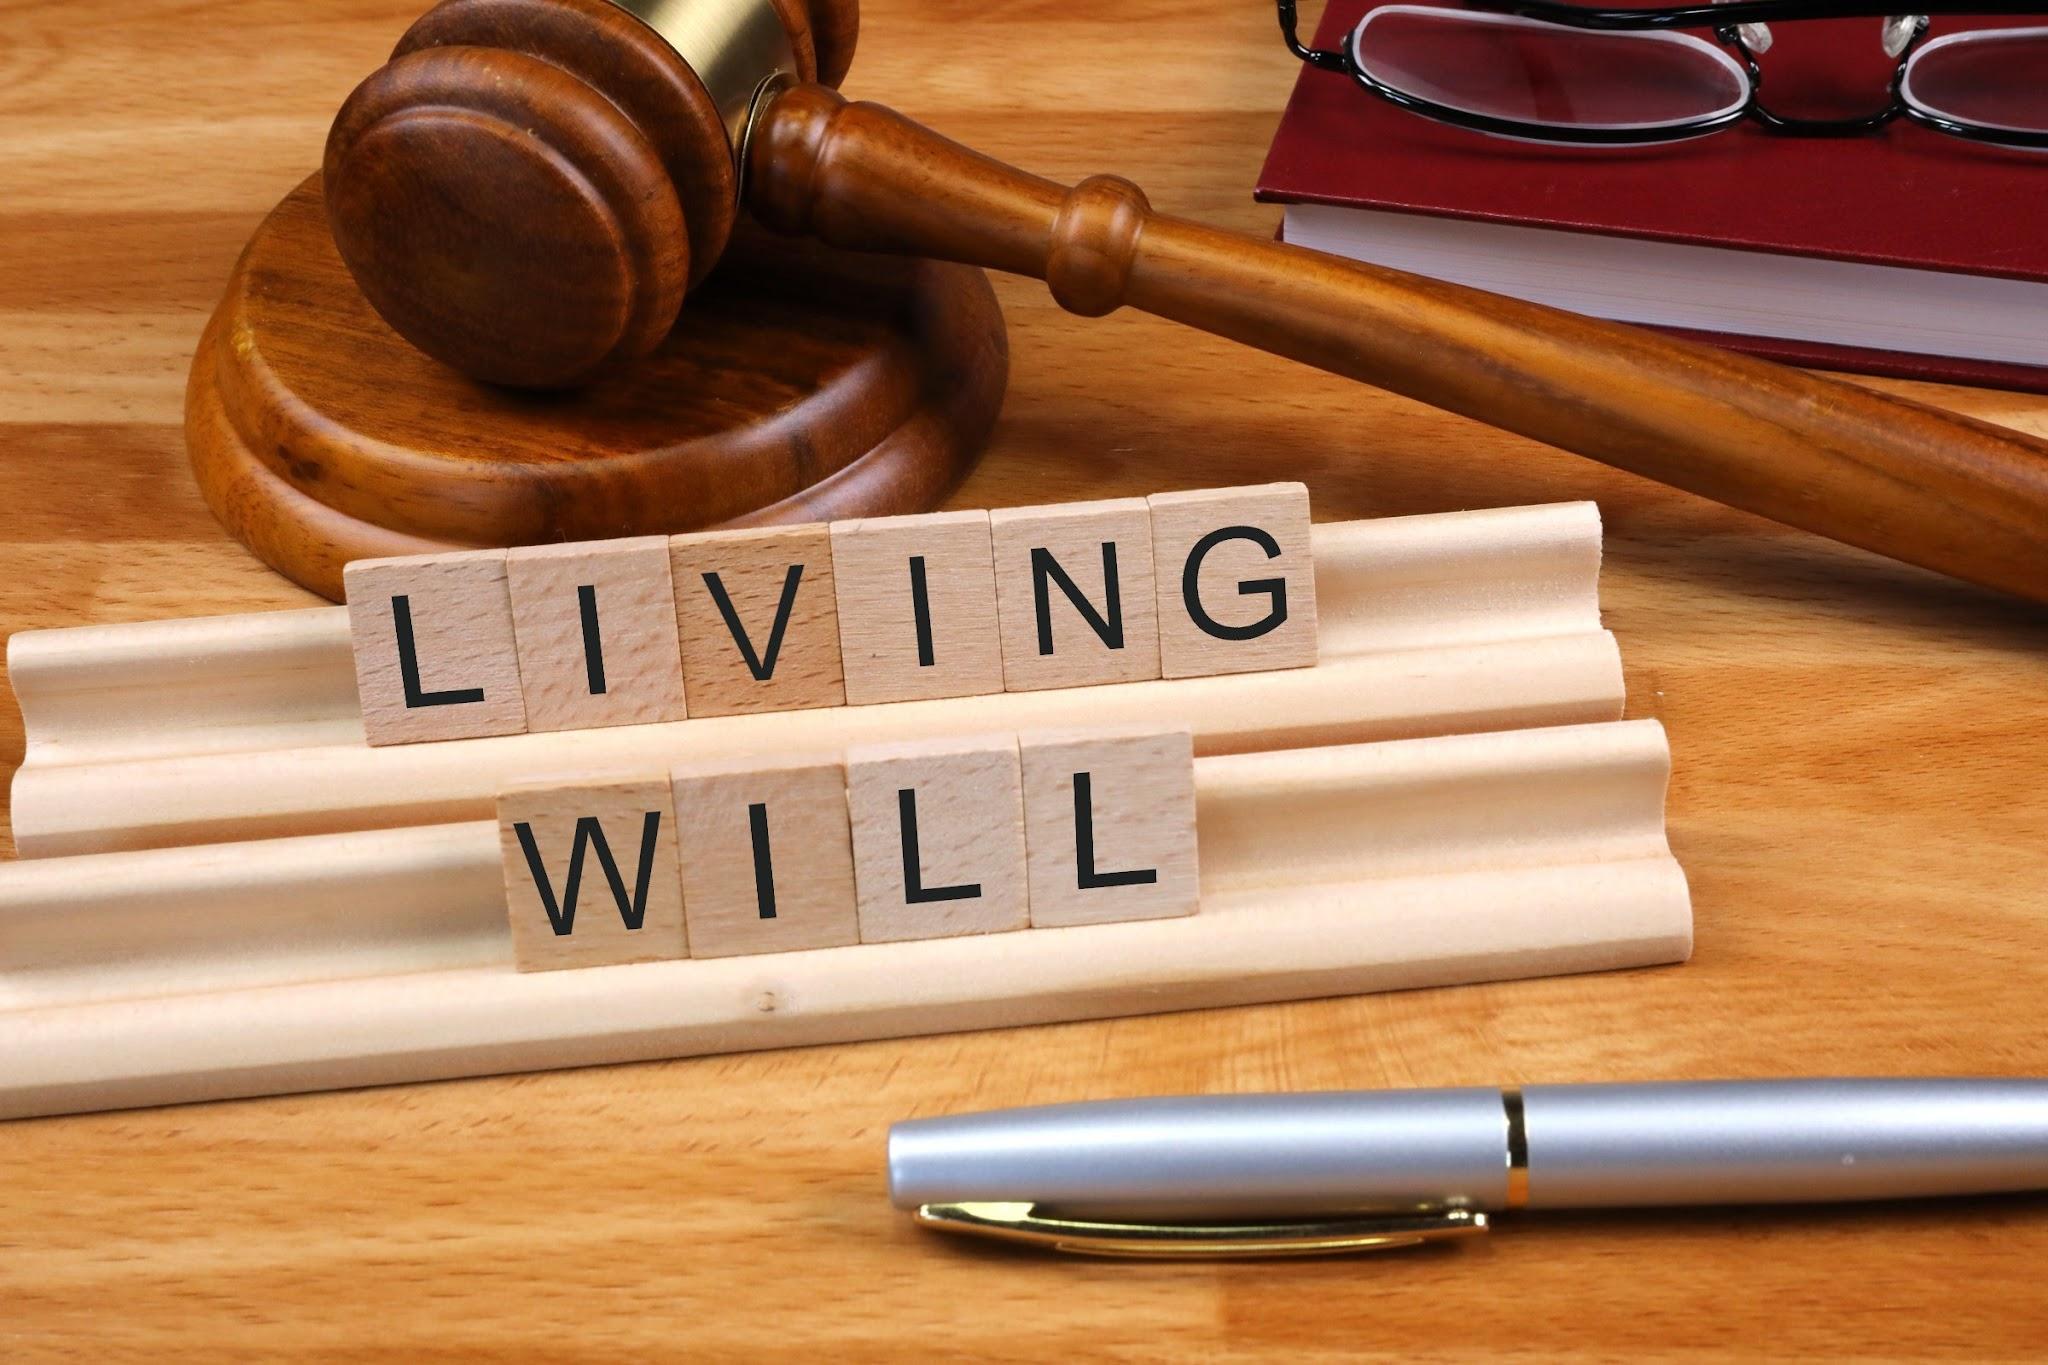 Wooden gavel and scrabble tiles spelling "What is a living will in Texas" on a desk with rolled documents, a pen, and glasses.